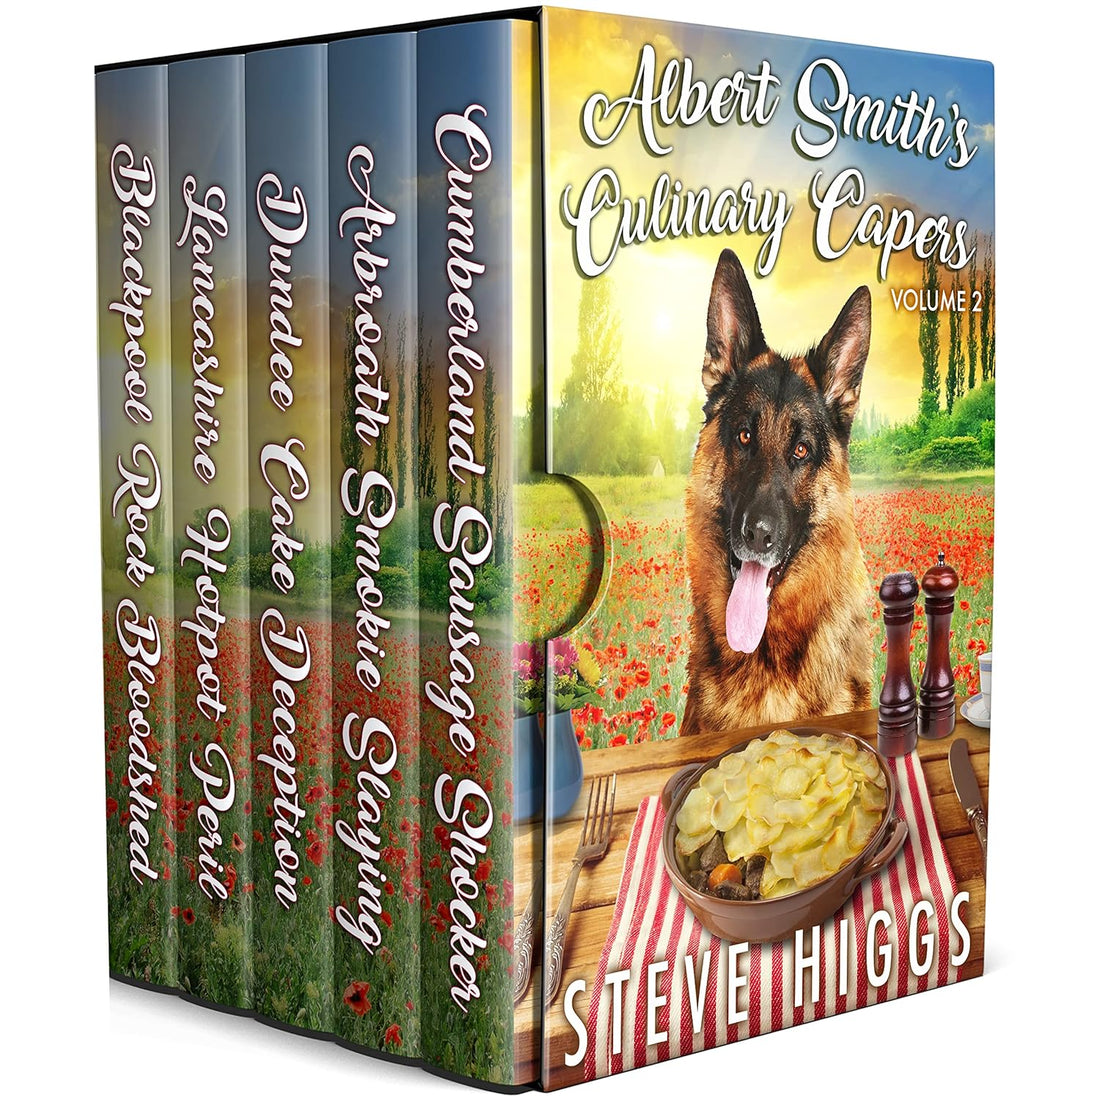 Albert Smith's Culinary Capers; Series 1; Books 6-10